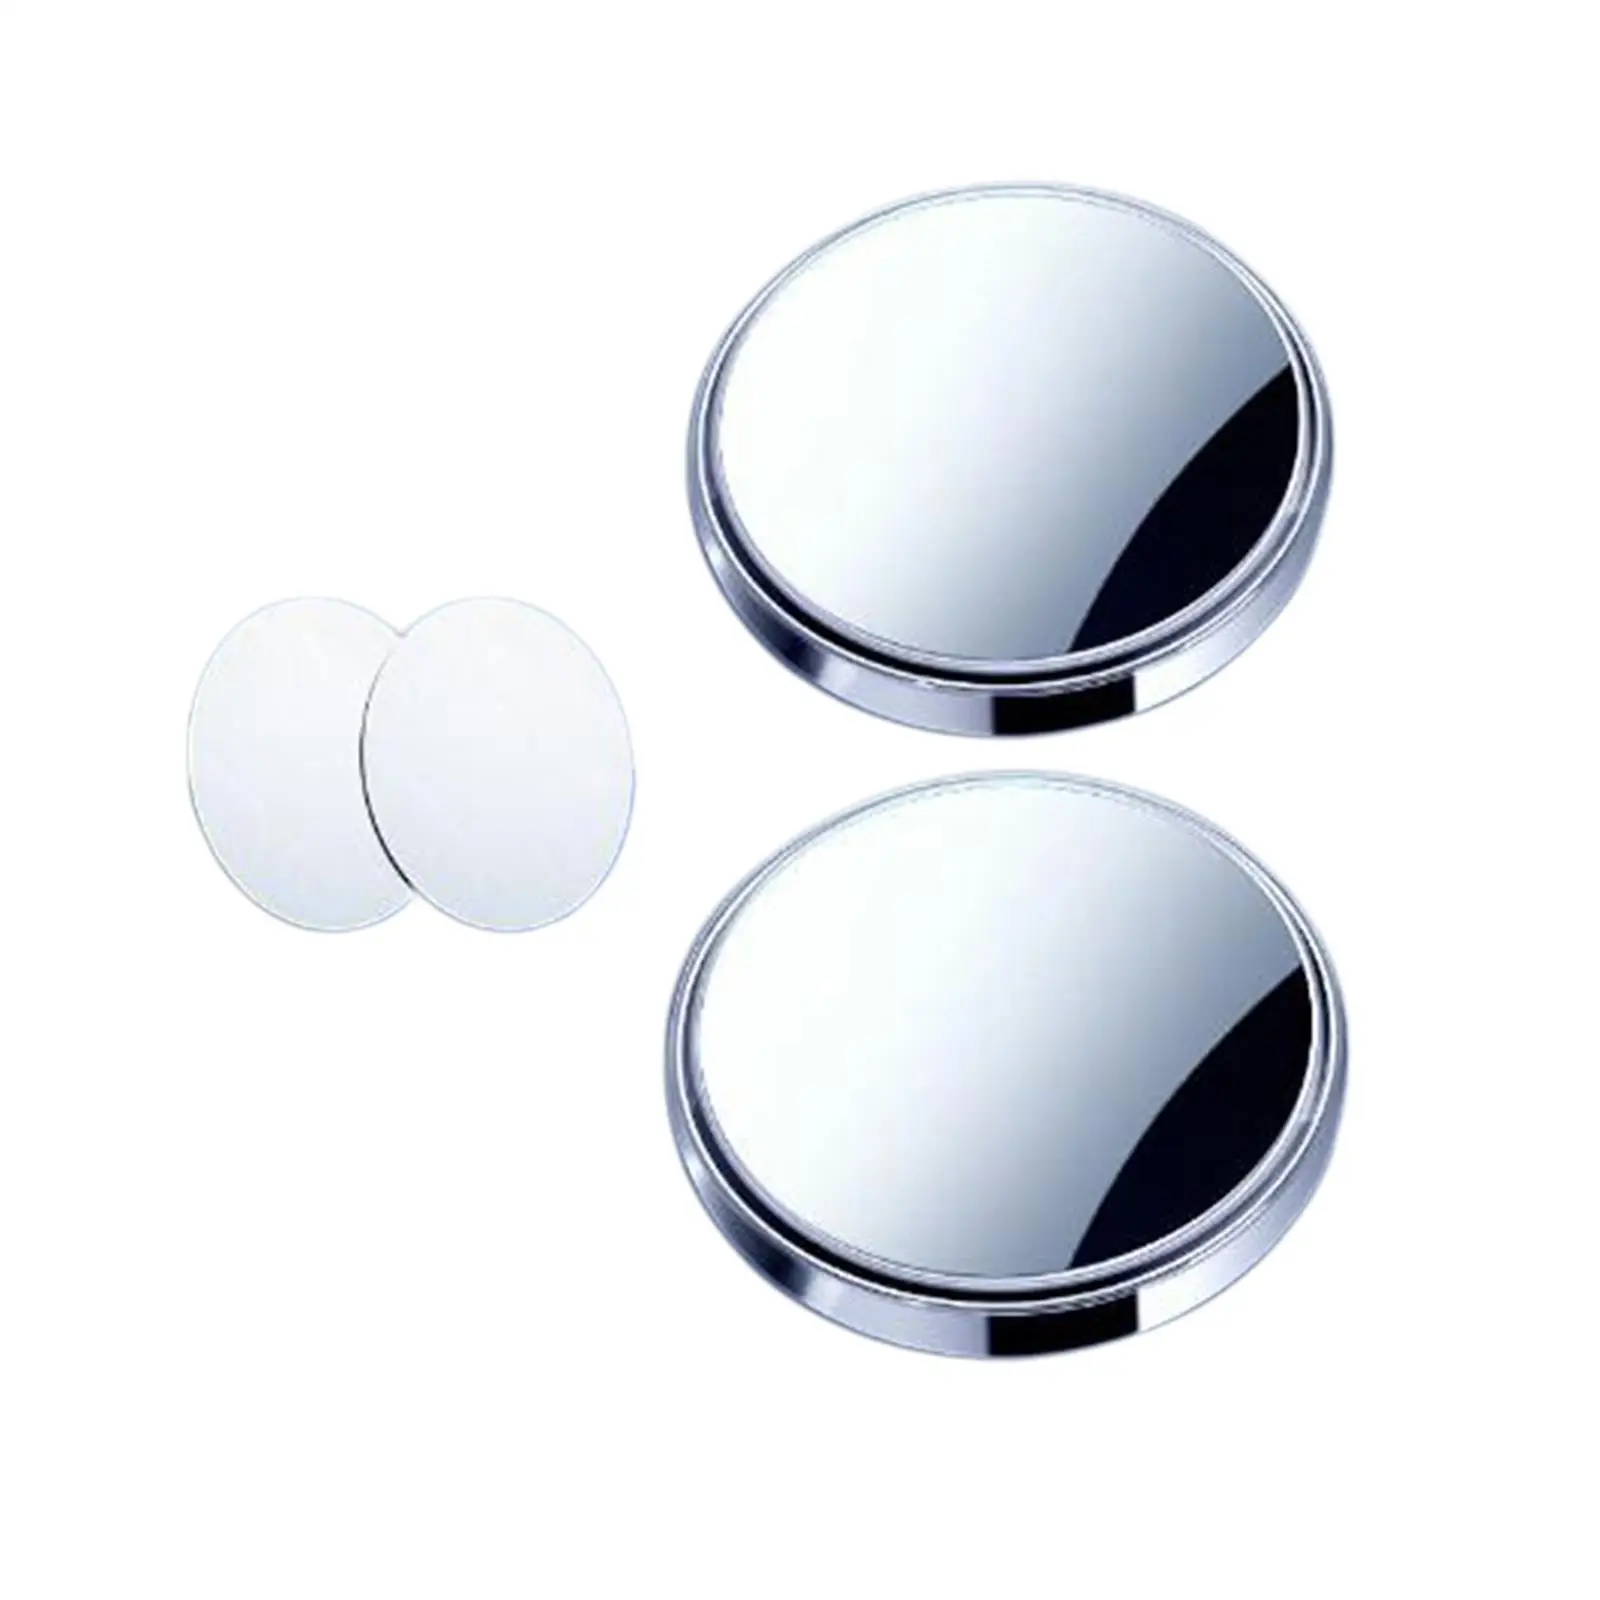 2x Automotive Spot Mirrors for Byd Yuan Plus Atto3